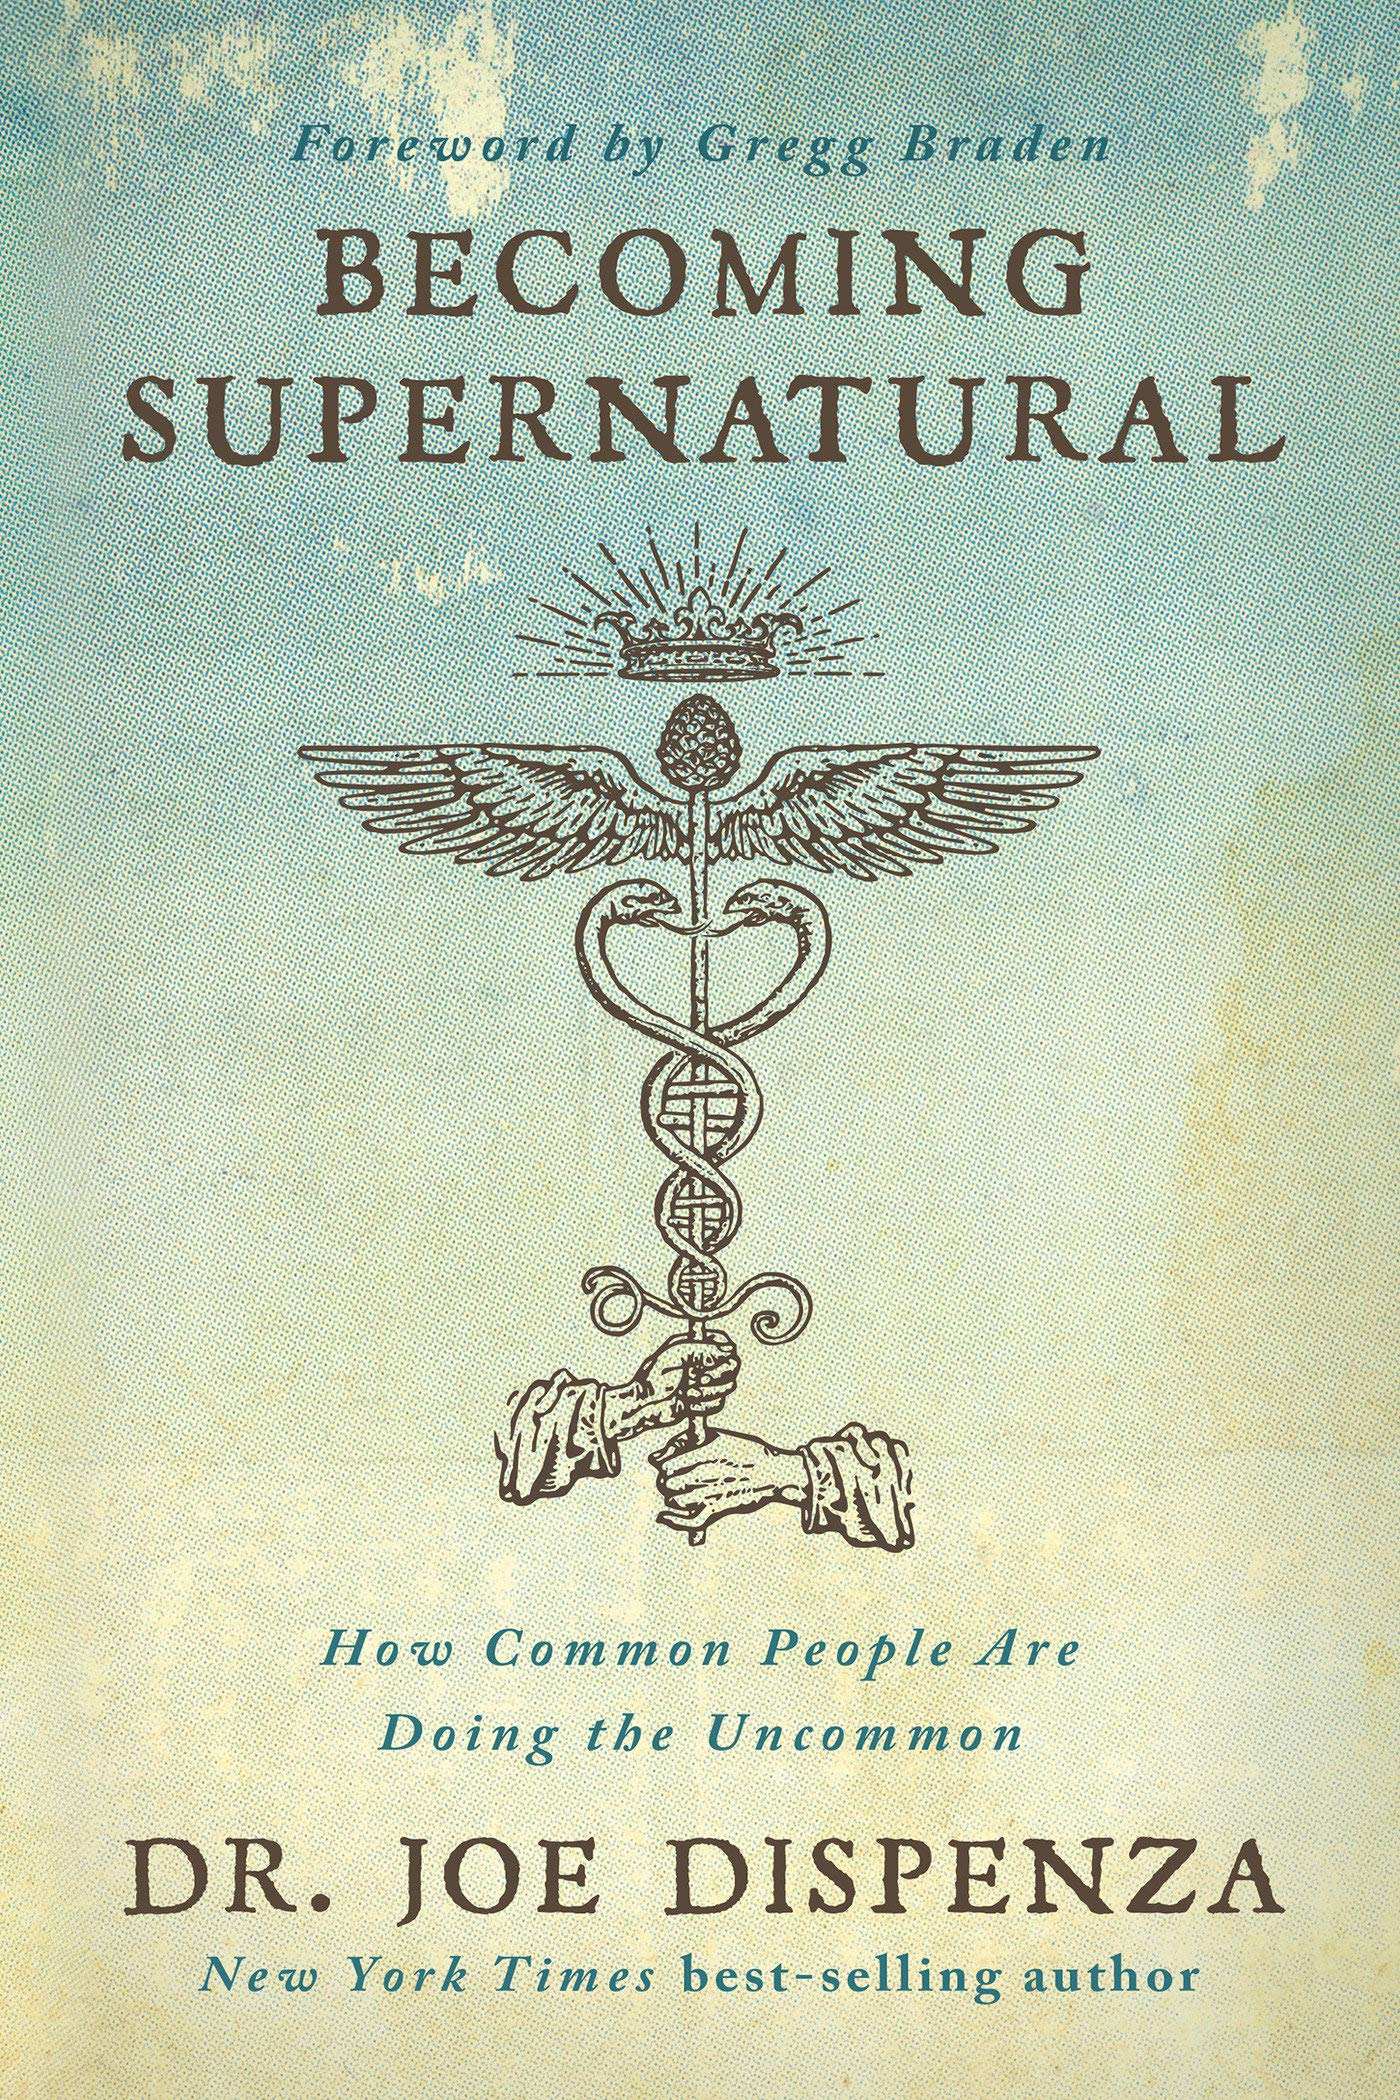 Becoming Supernatural: How Common People Are Doing the Uncommon (Copy) (Copy)